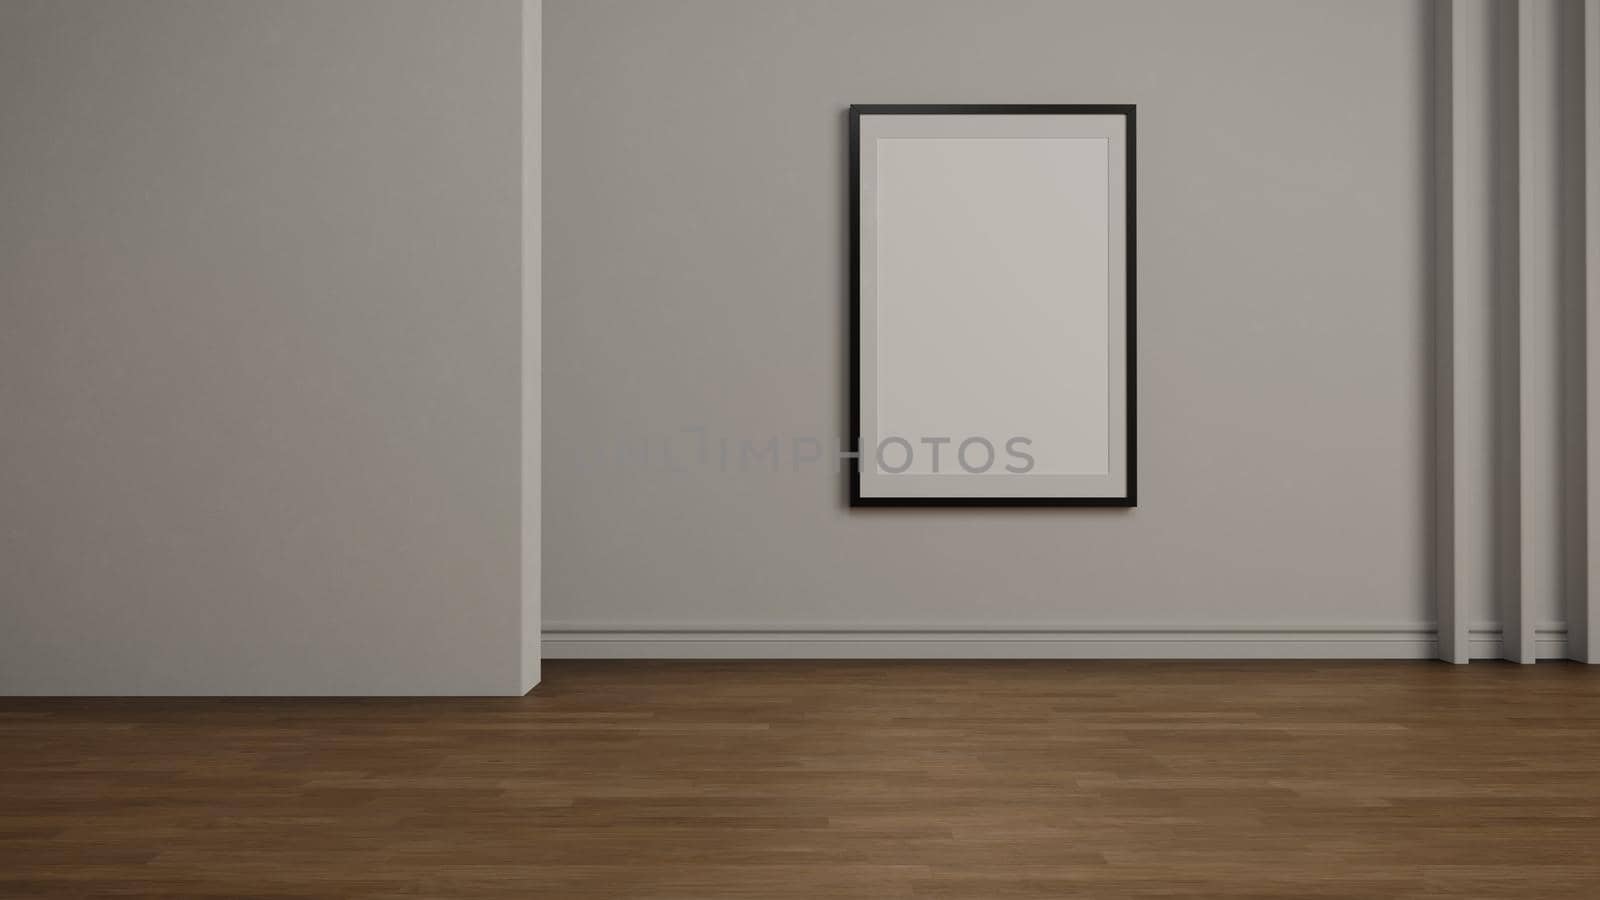 Painting or photo frame mock up on wooden floor with light wall. 3D illustration. by yay_lmrb